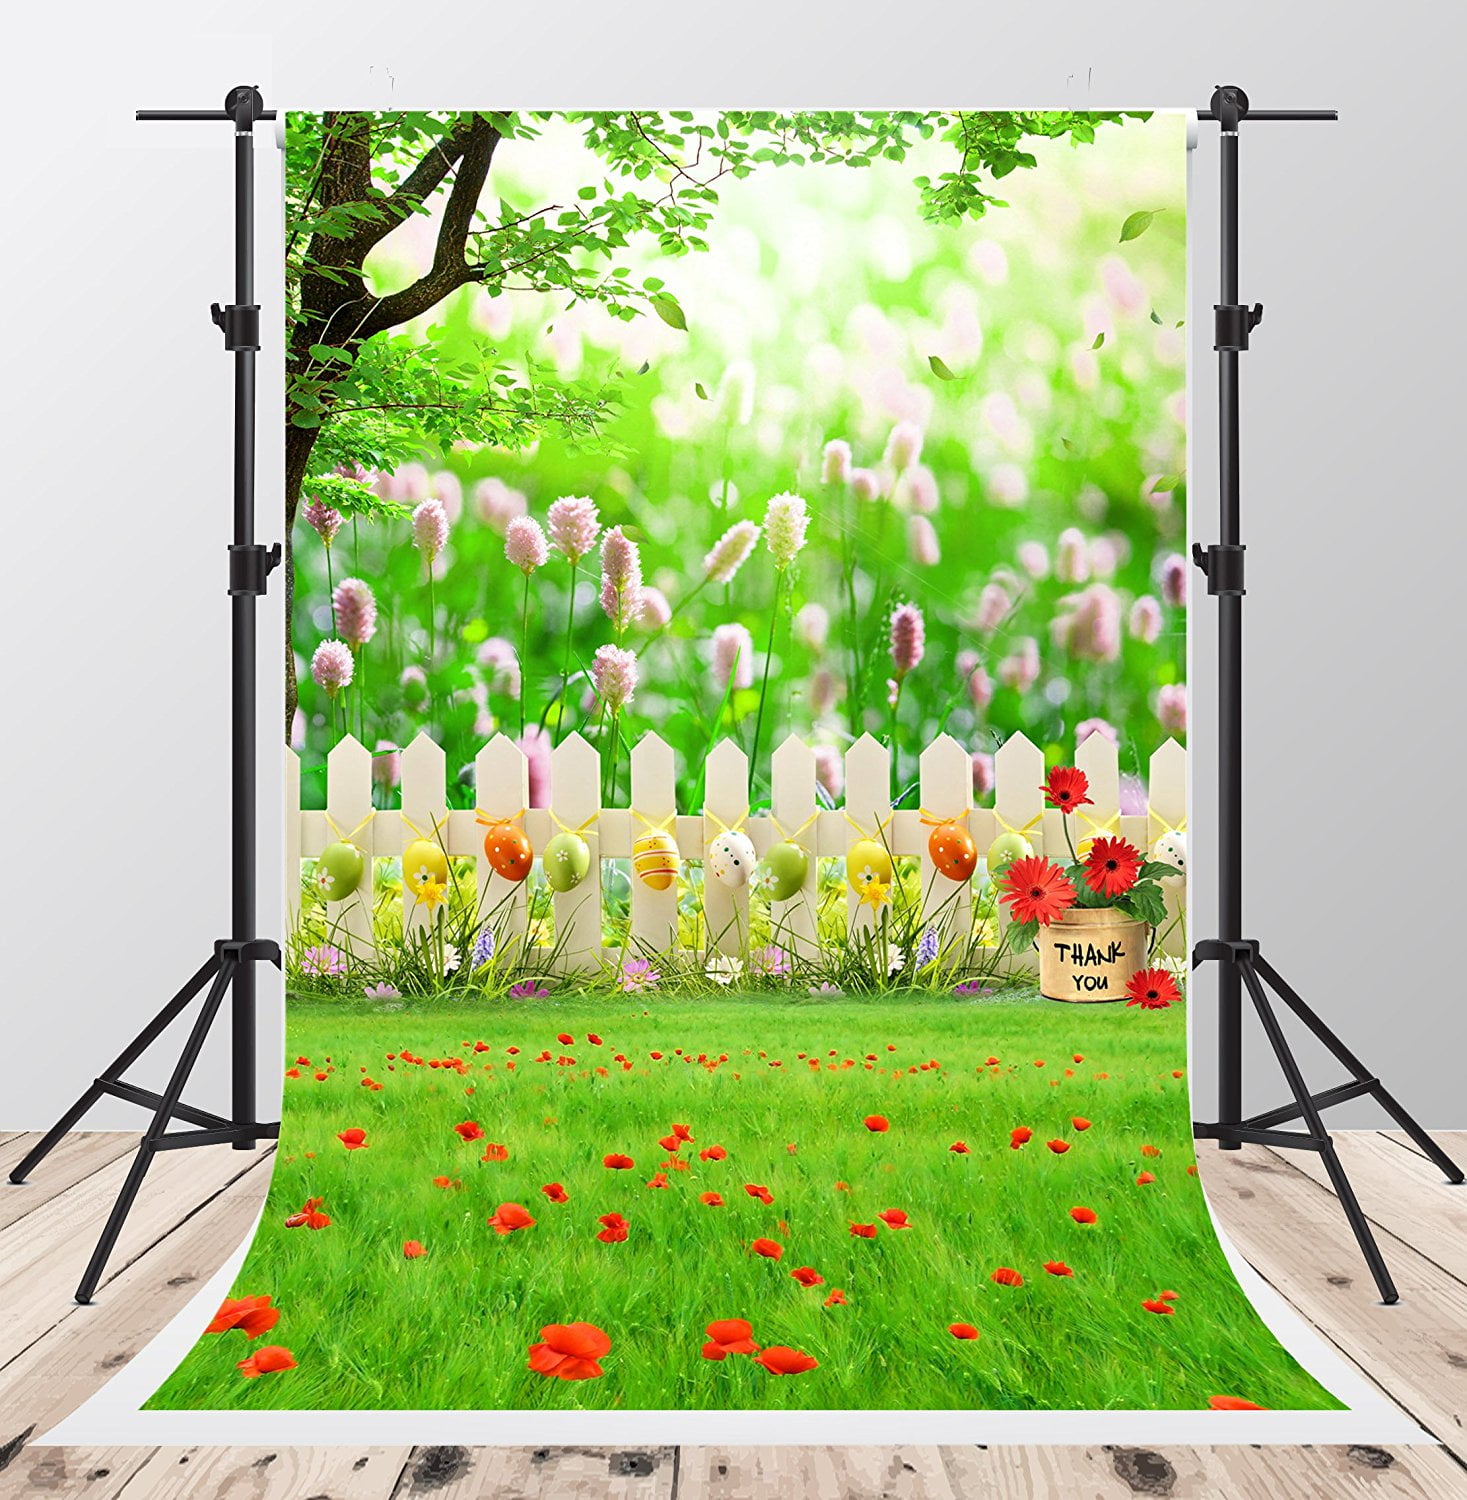 5x7ft Room Carpet Flowers Camero Balloon Photography Background Computer-Printed Vinyl Backdrops